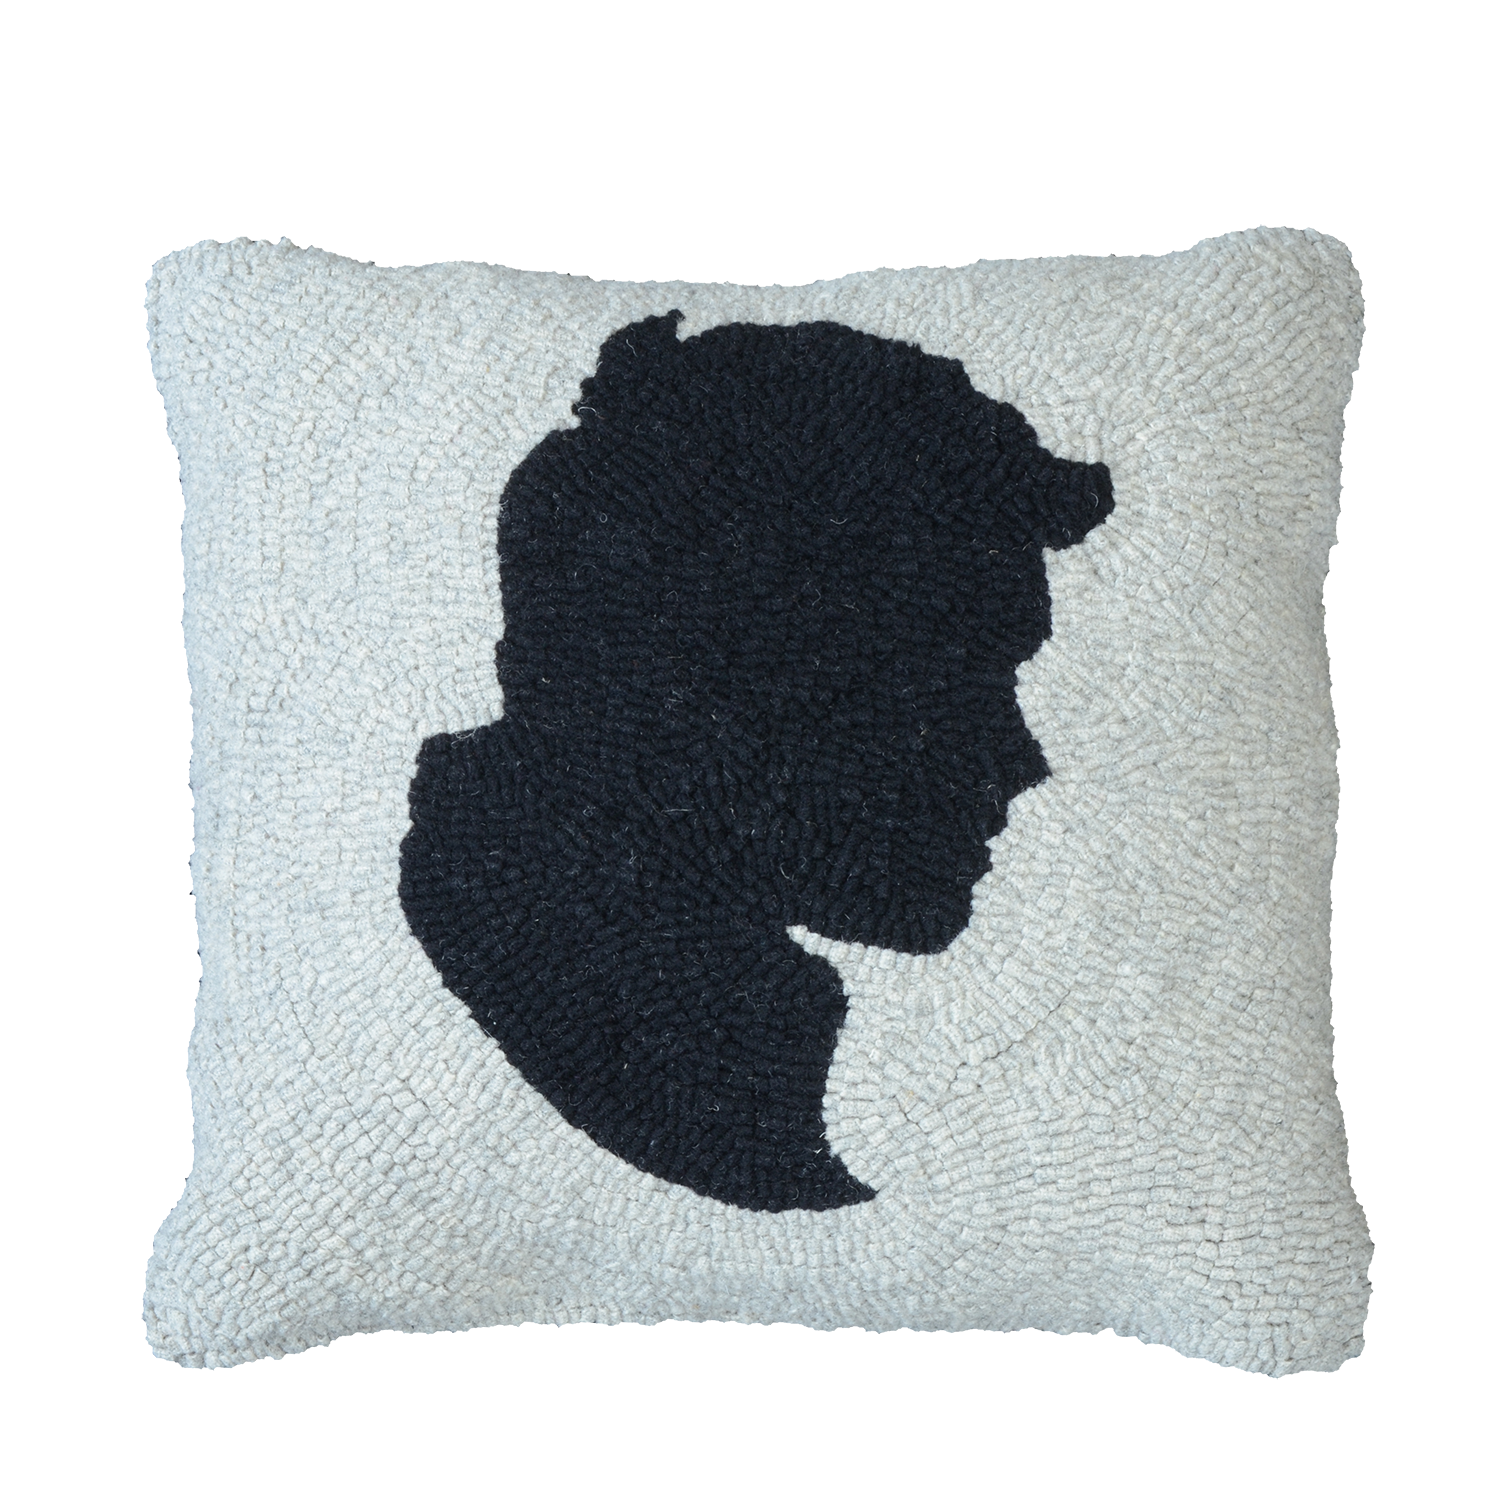 Hooked Silhouette Pillow - Custom Made in Your Images.